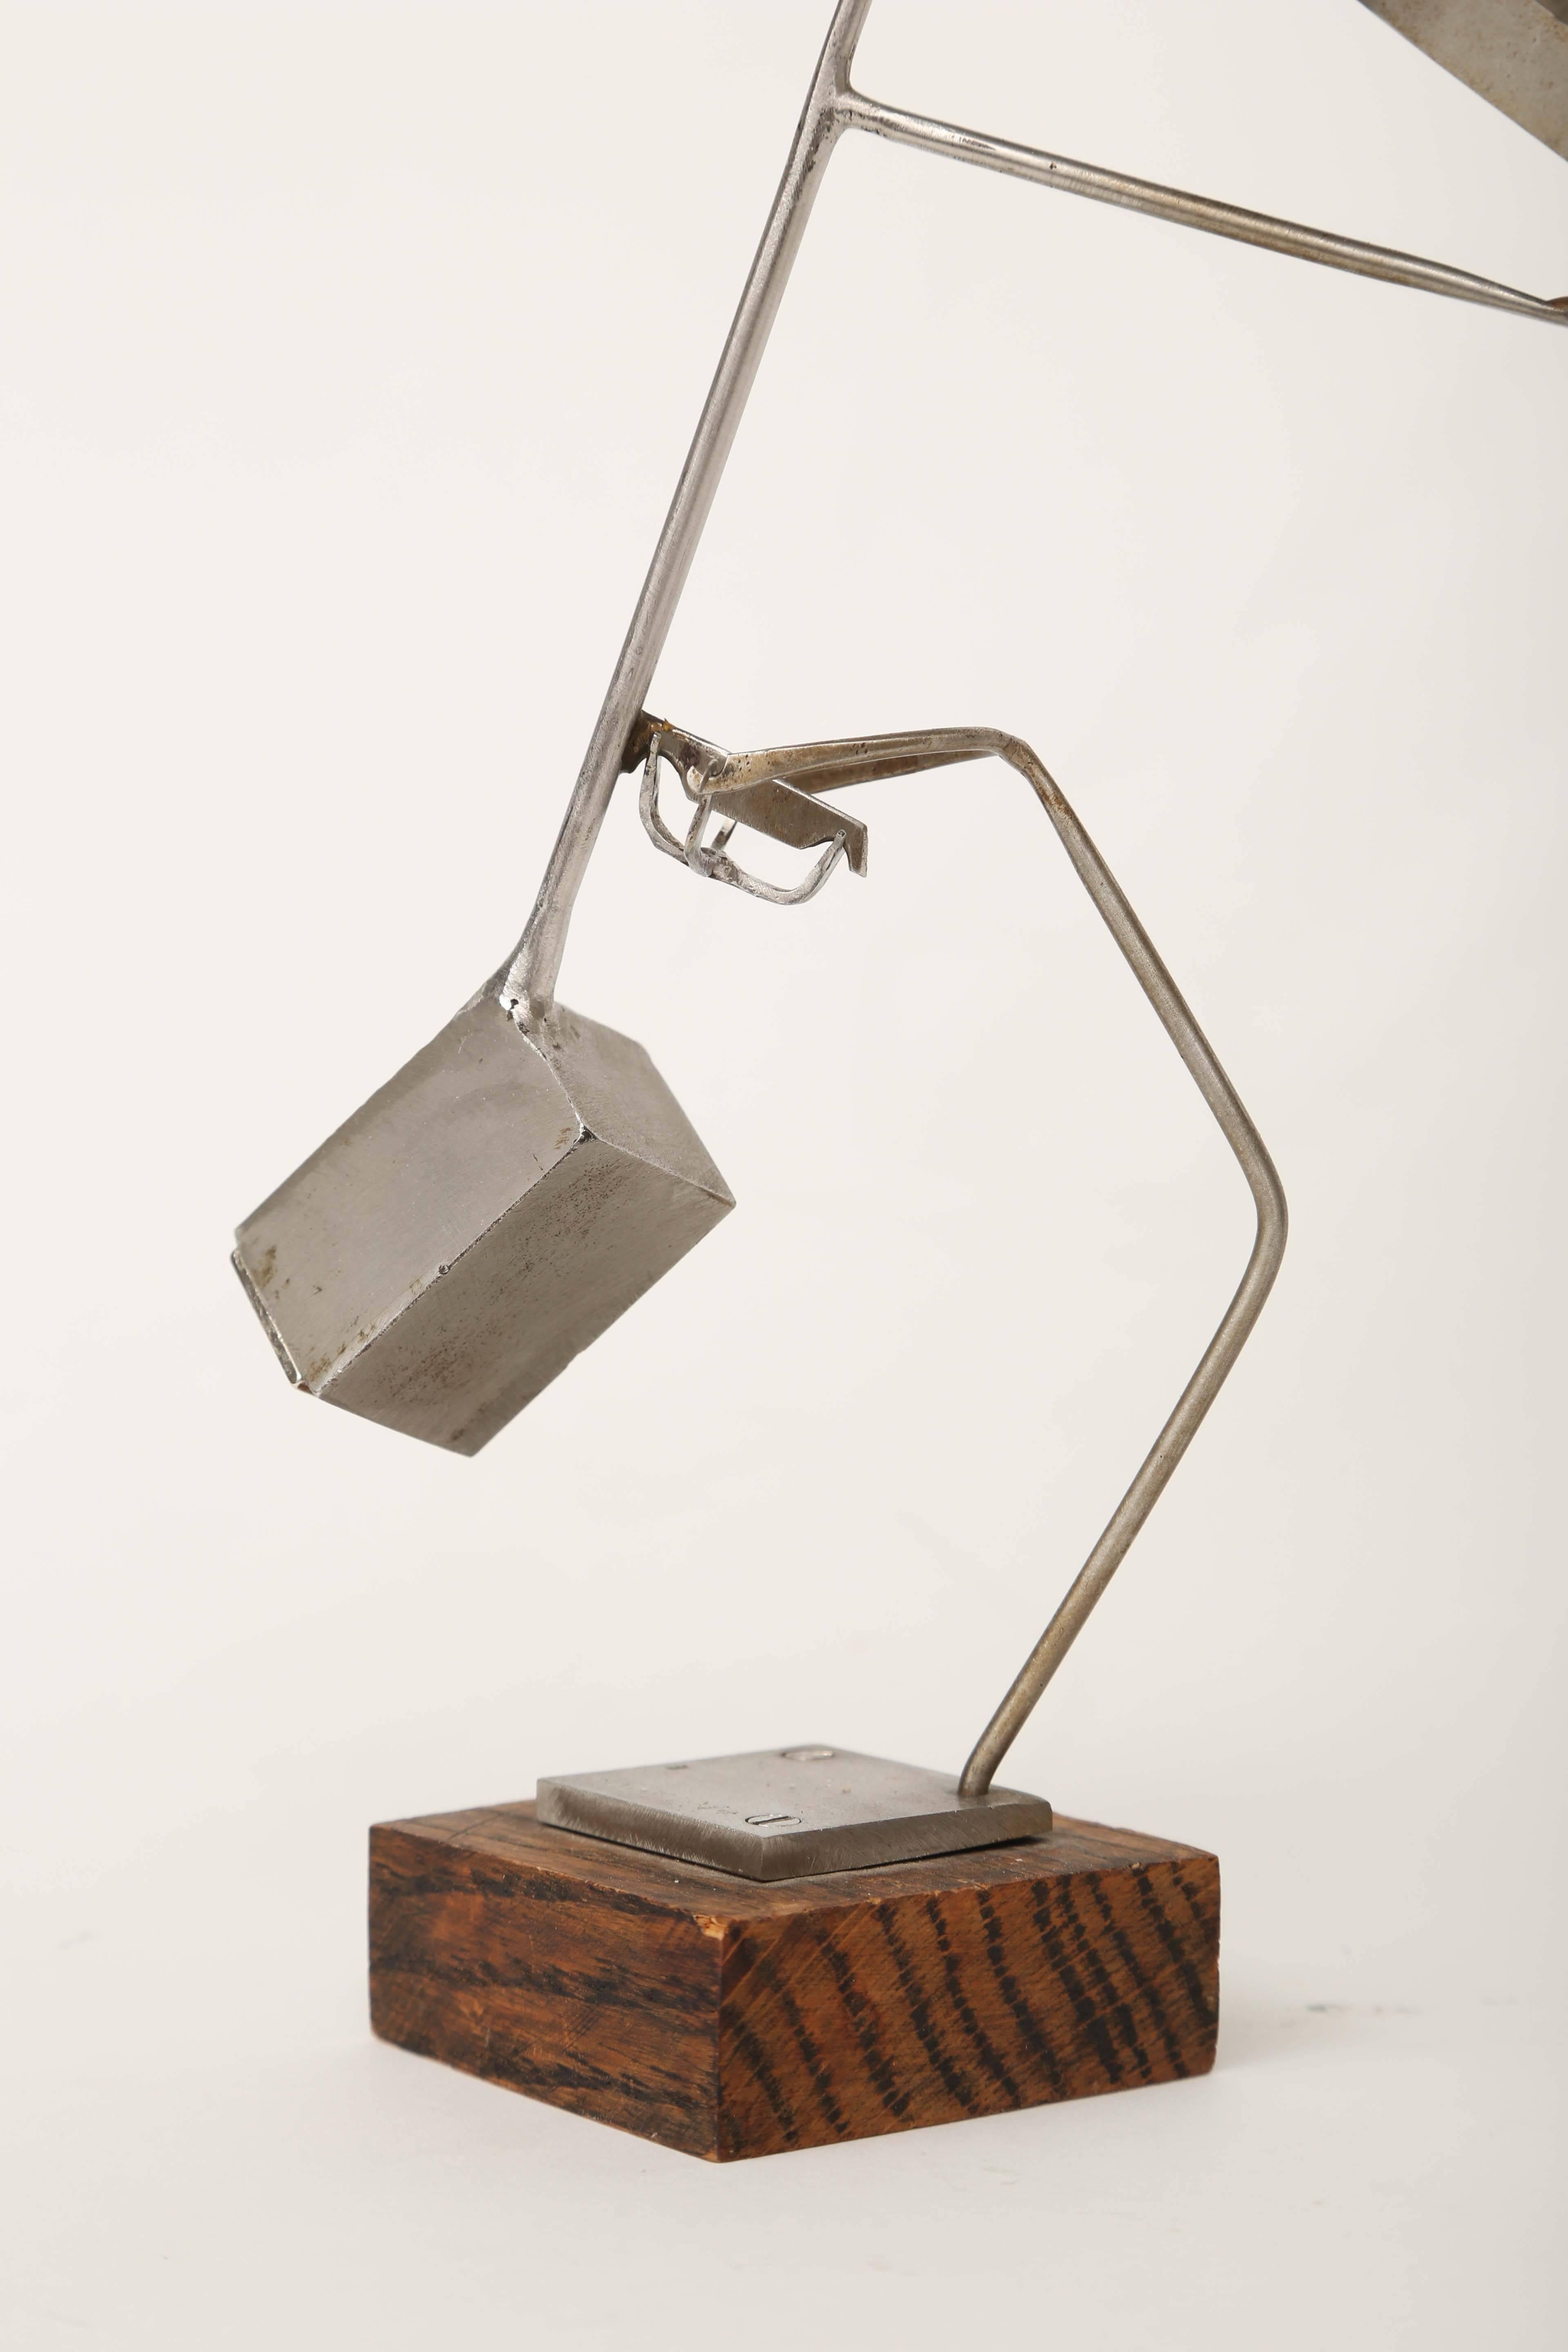 george rickey kinetic sculpture for sale